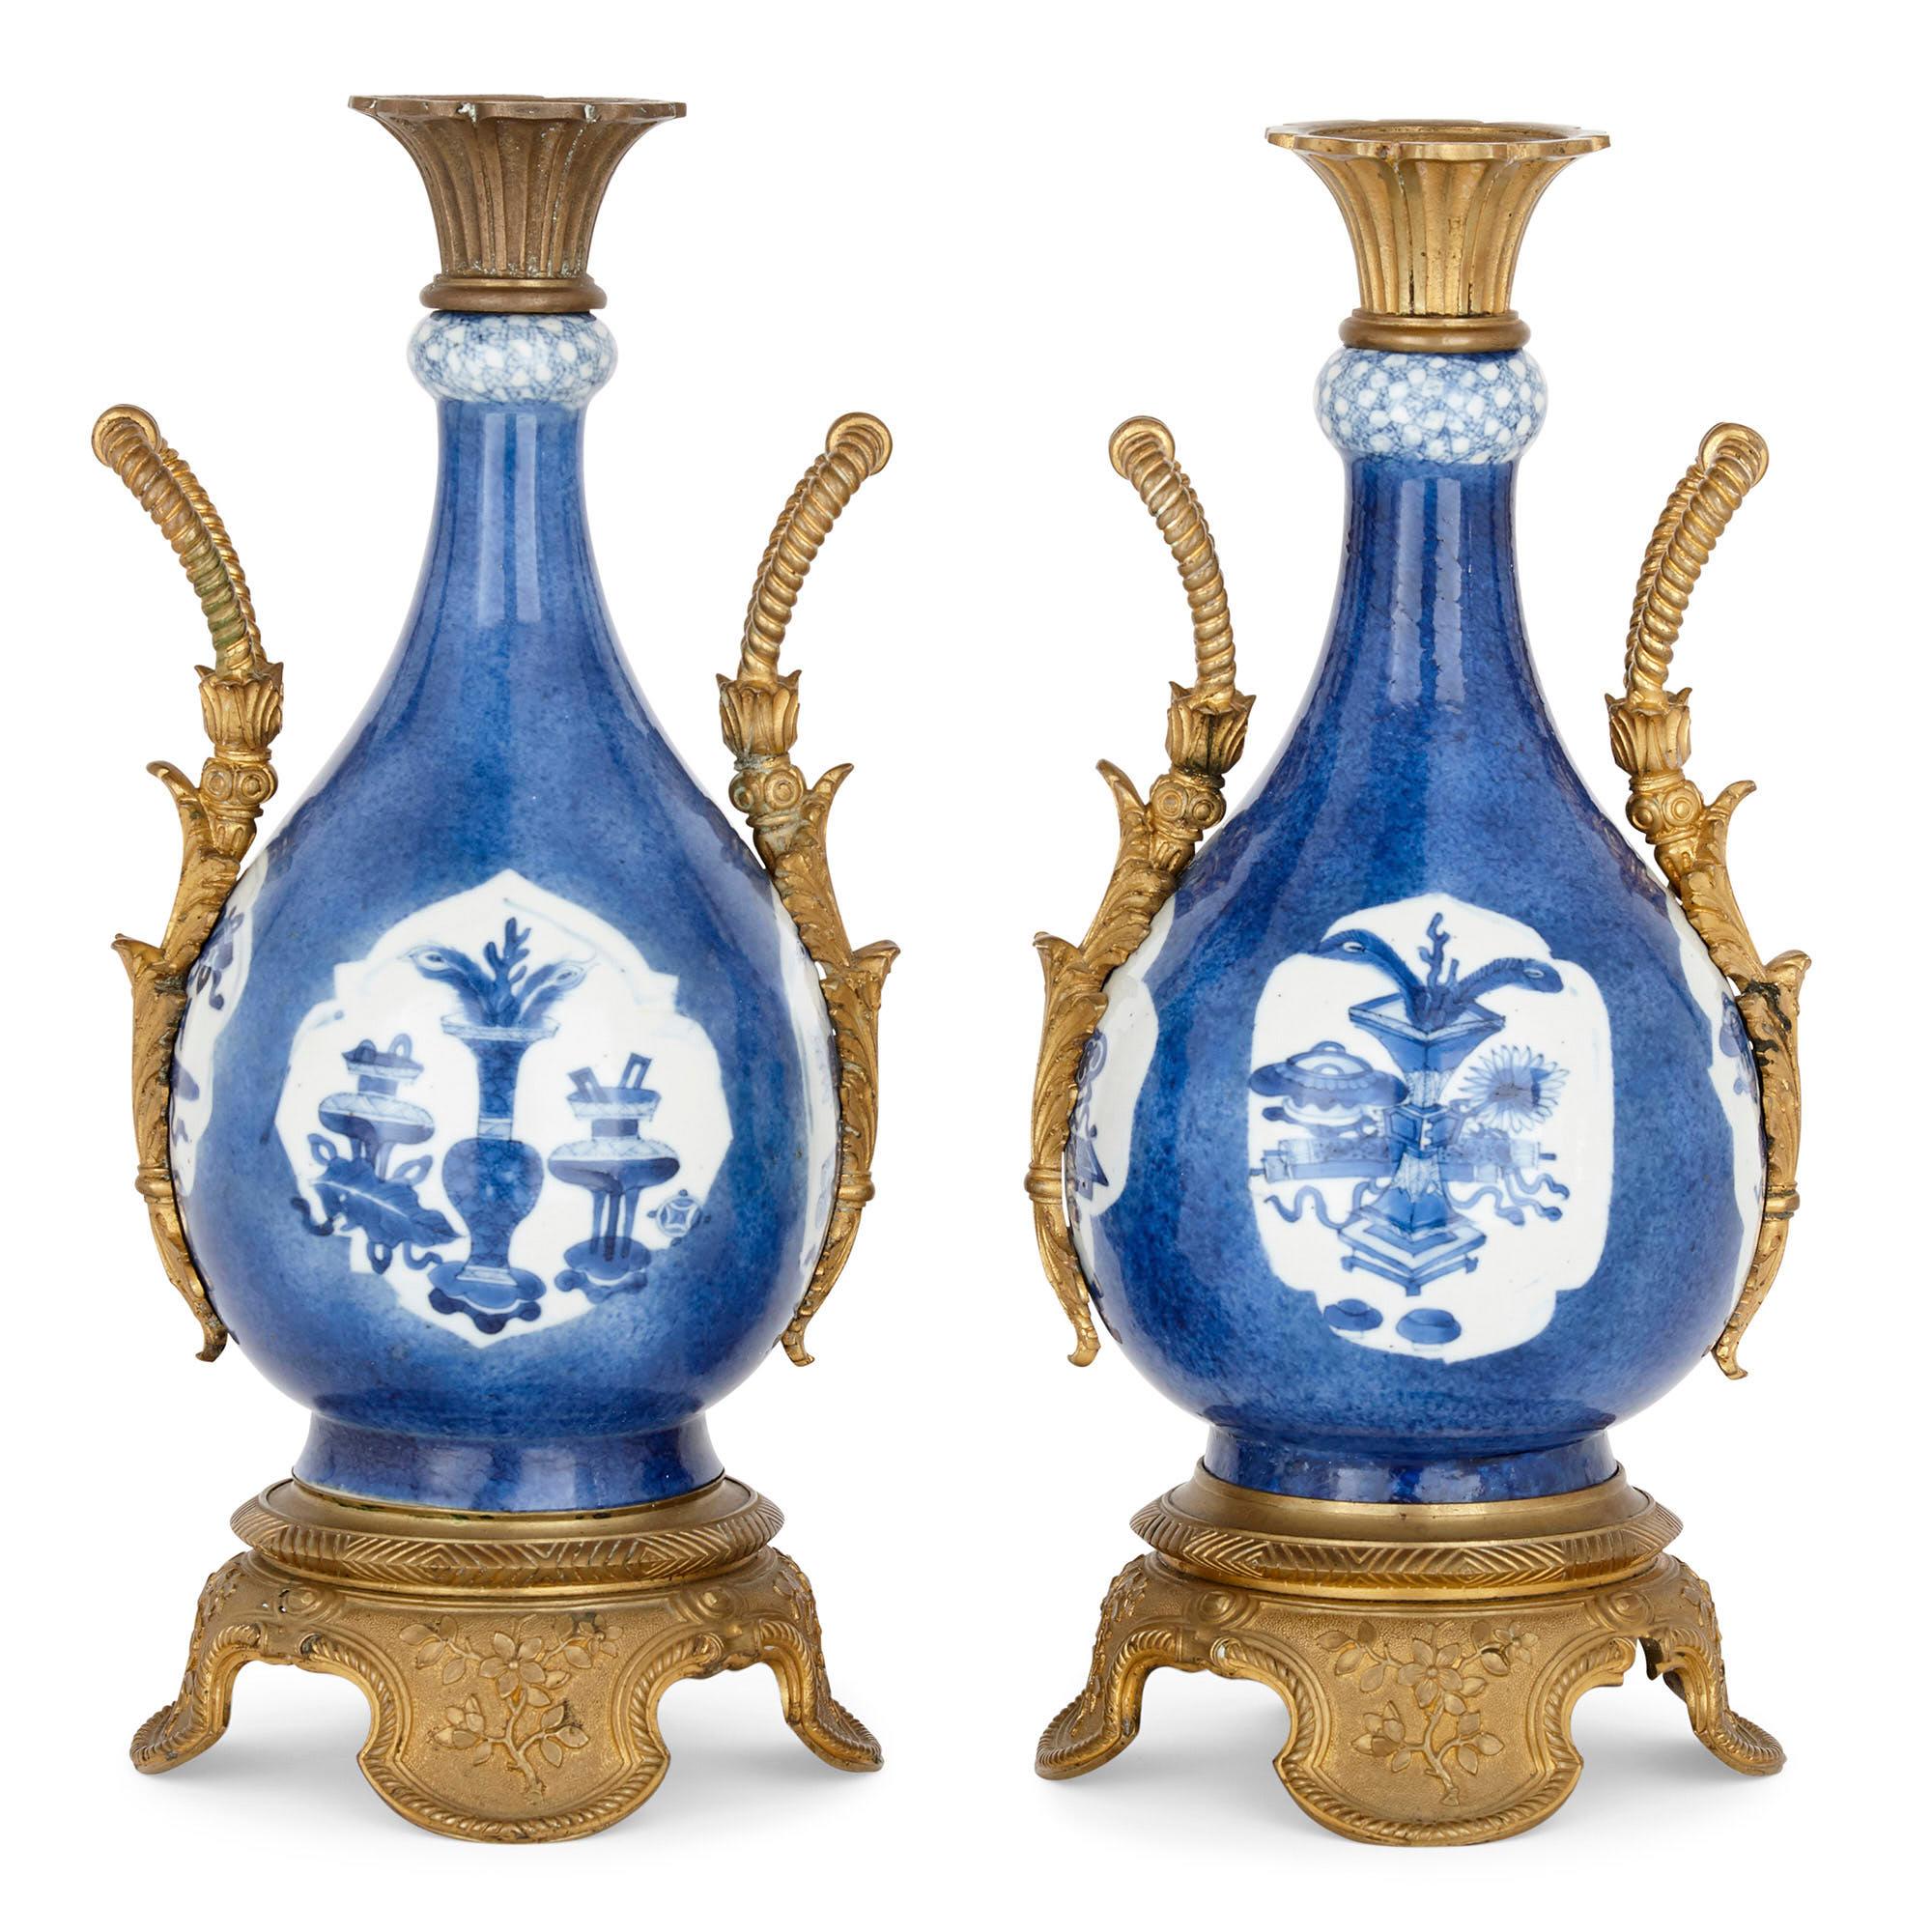 The vases in this pair feature the striking combination of Kangxi era (circa 1700) porcelain with later 19th century French gilt bronze. This type of combination—of Chinese porcelain with European, often French, additions, in this case gilt bronze